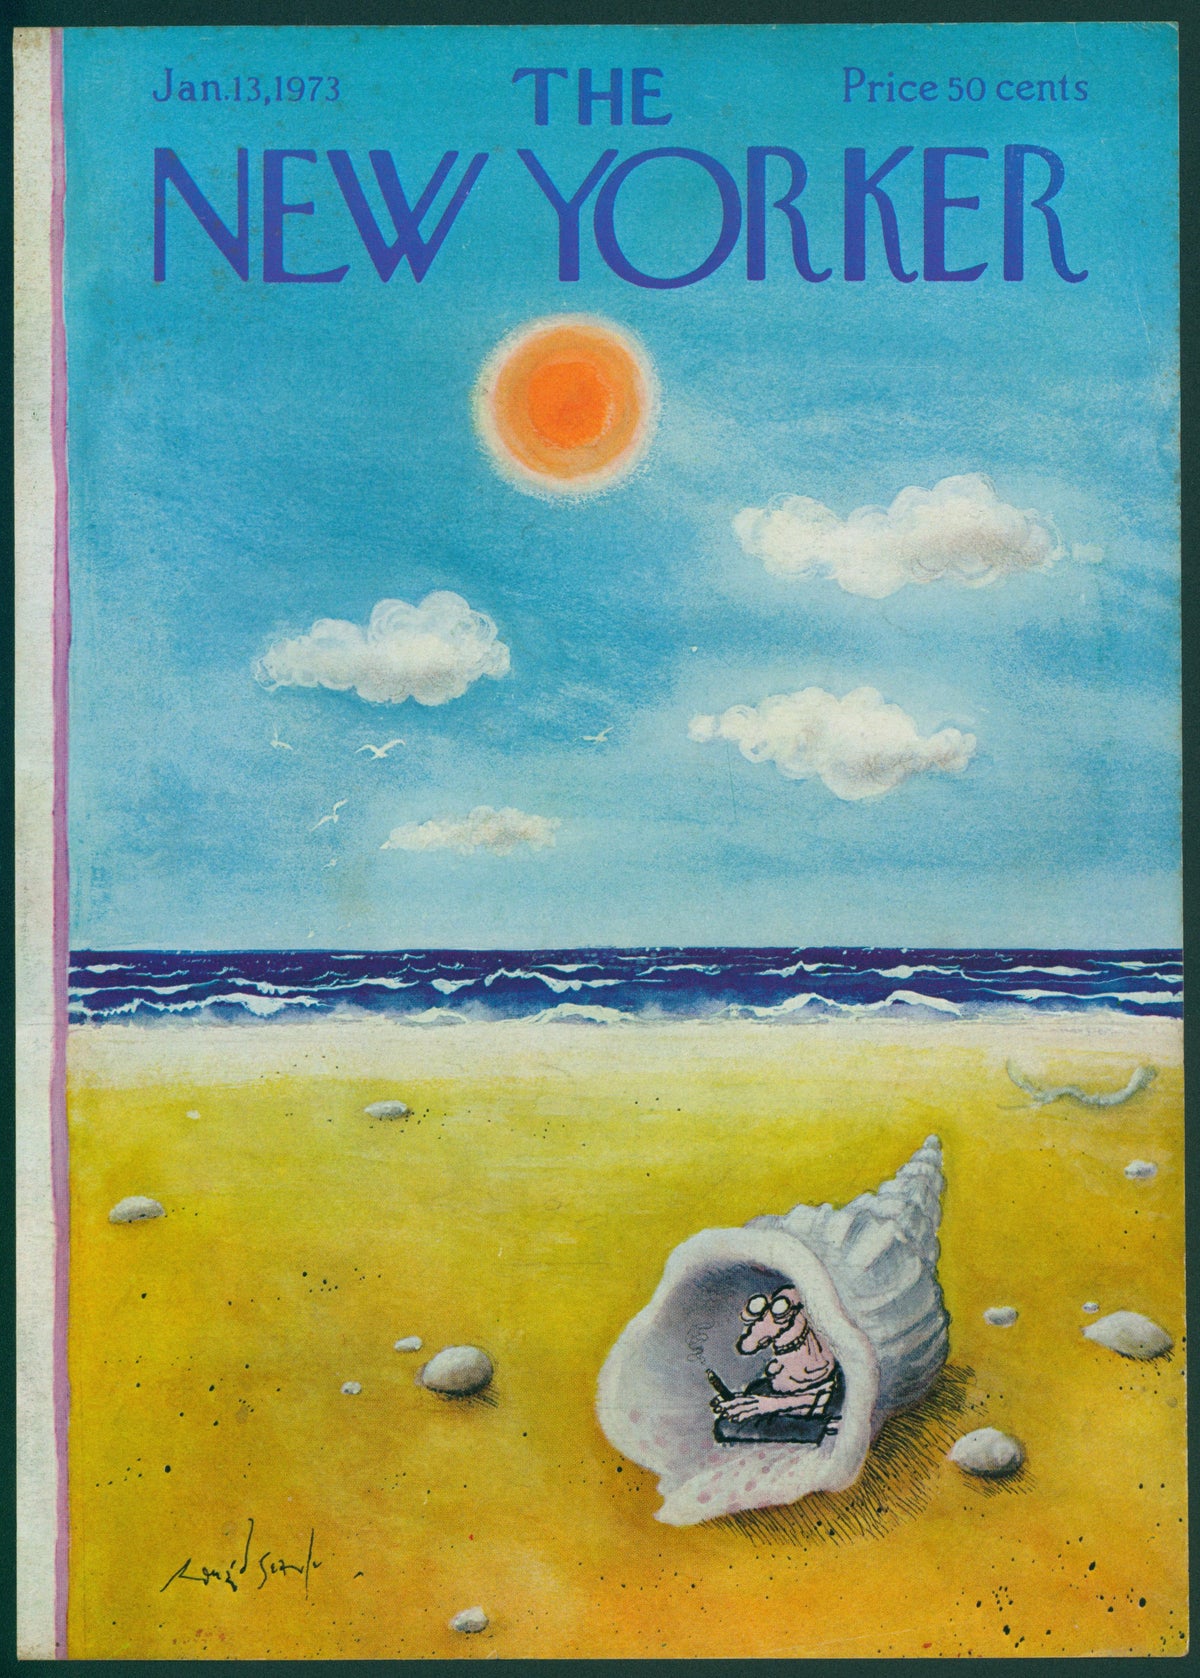 Magic Conch- The New Yorker - Authentic Vintage Antique Print